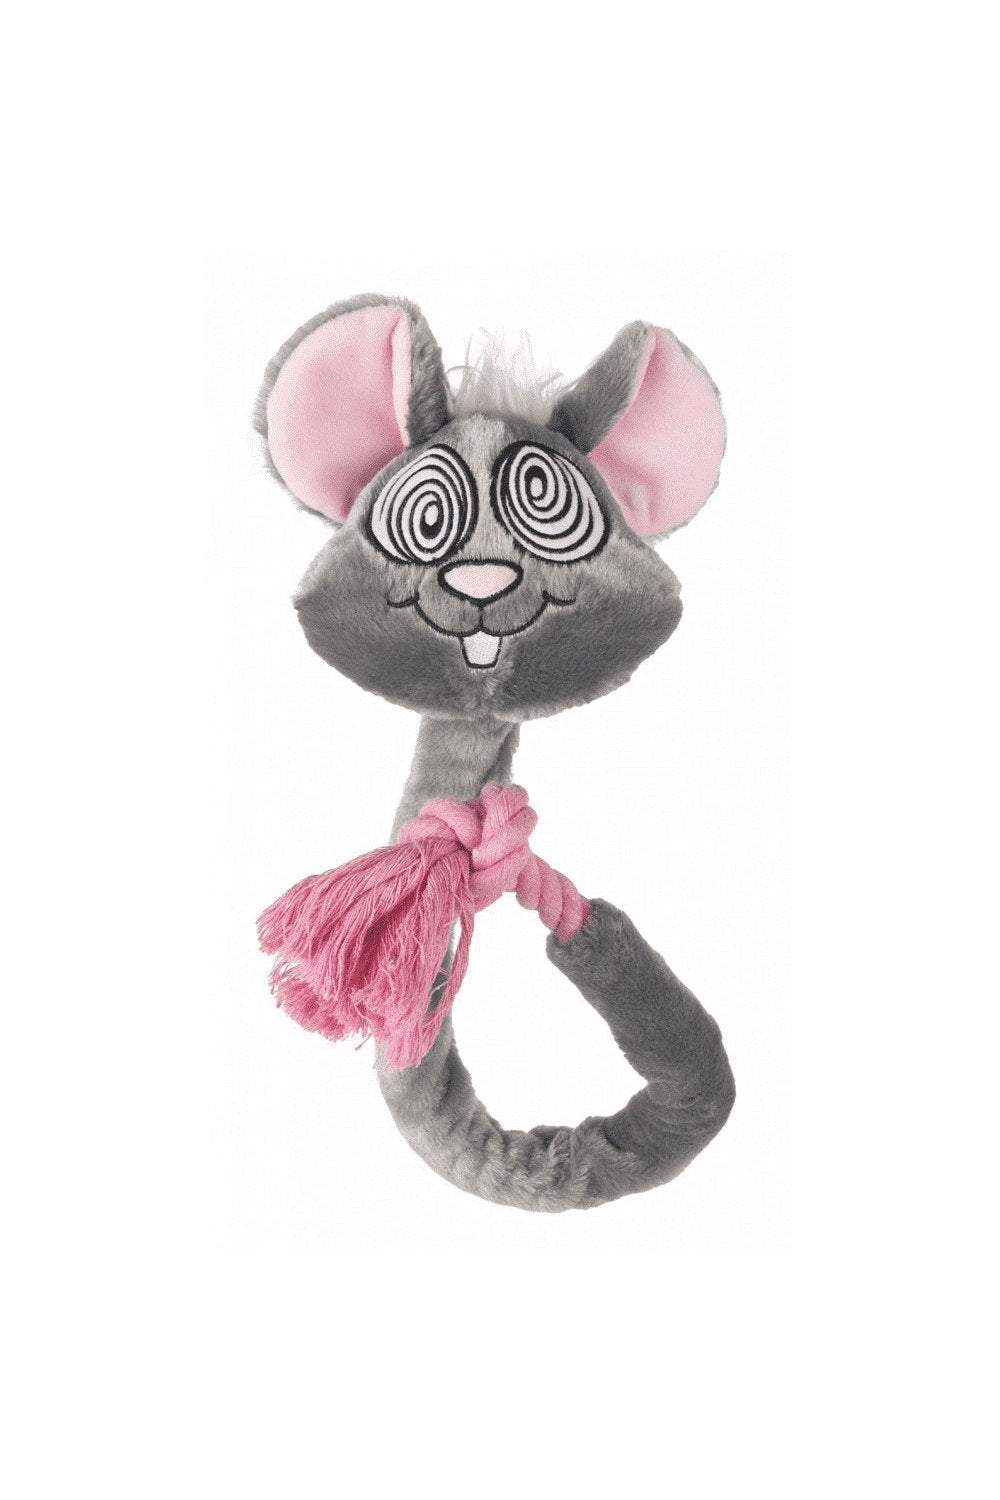 Fofos Eye Mouse Rope Dog Toy (Gray/Pink) (One Size)